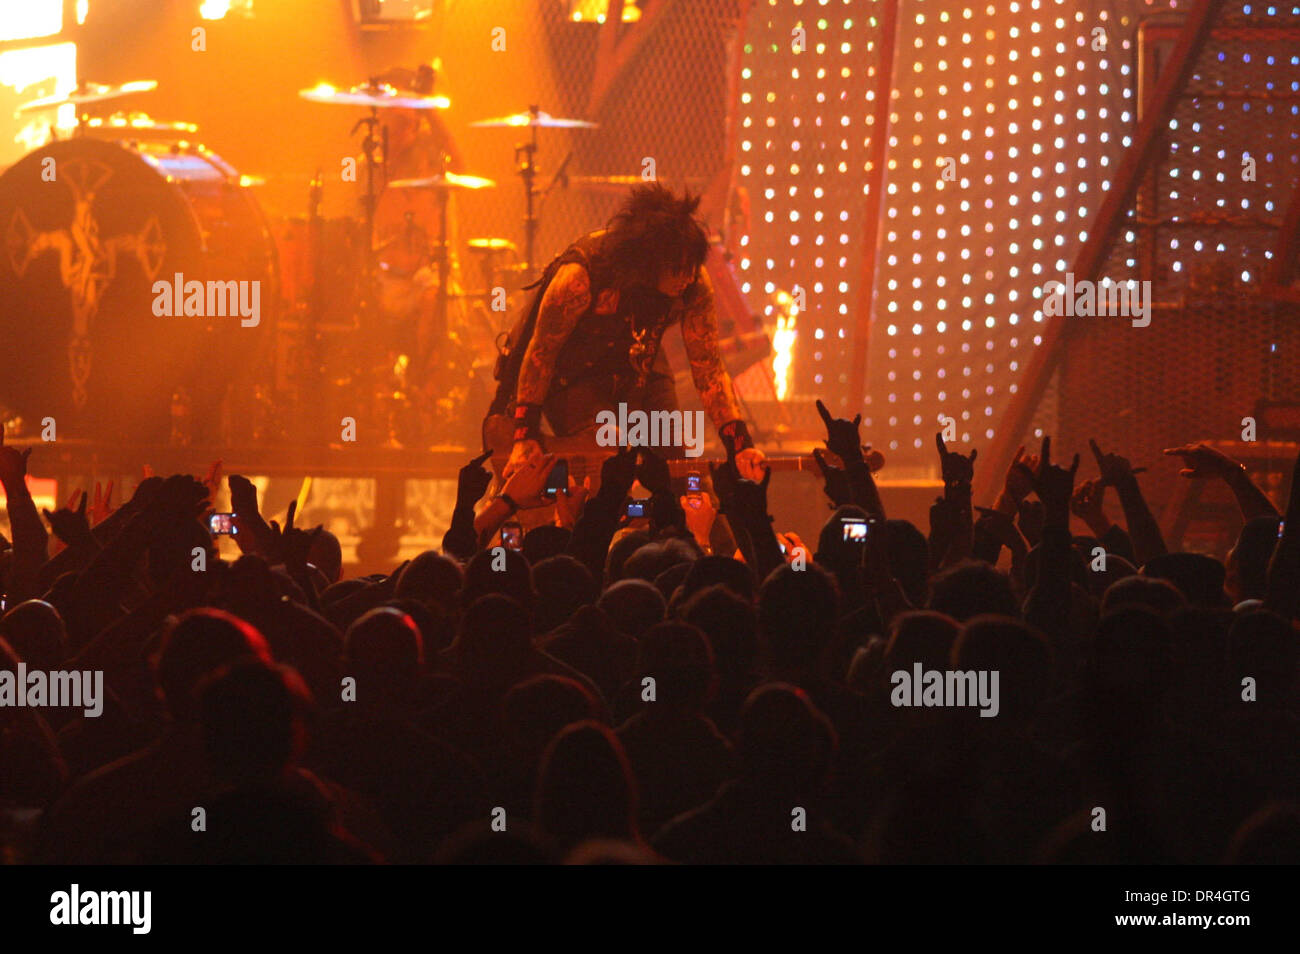 Feb 28, 2009 - New Orleans, Louisiana, USA - NIKKI SIXX of Motley Crue performs on stage during the band's Saints of Los Angeles Tour that made a stop at the New Orleans Arena. (Credit Image: © Derick Hingle/Southcreek EMI/ZUMA Press) Stock Photo